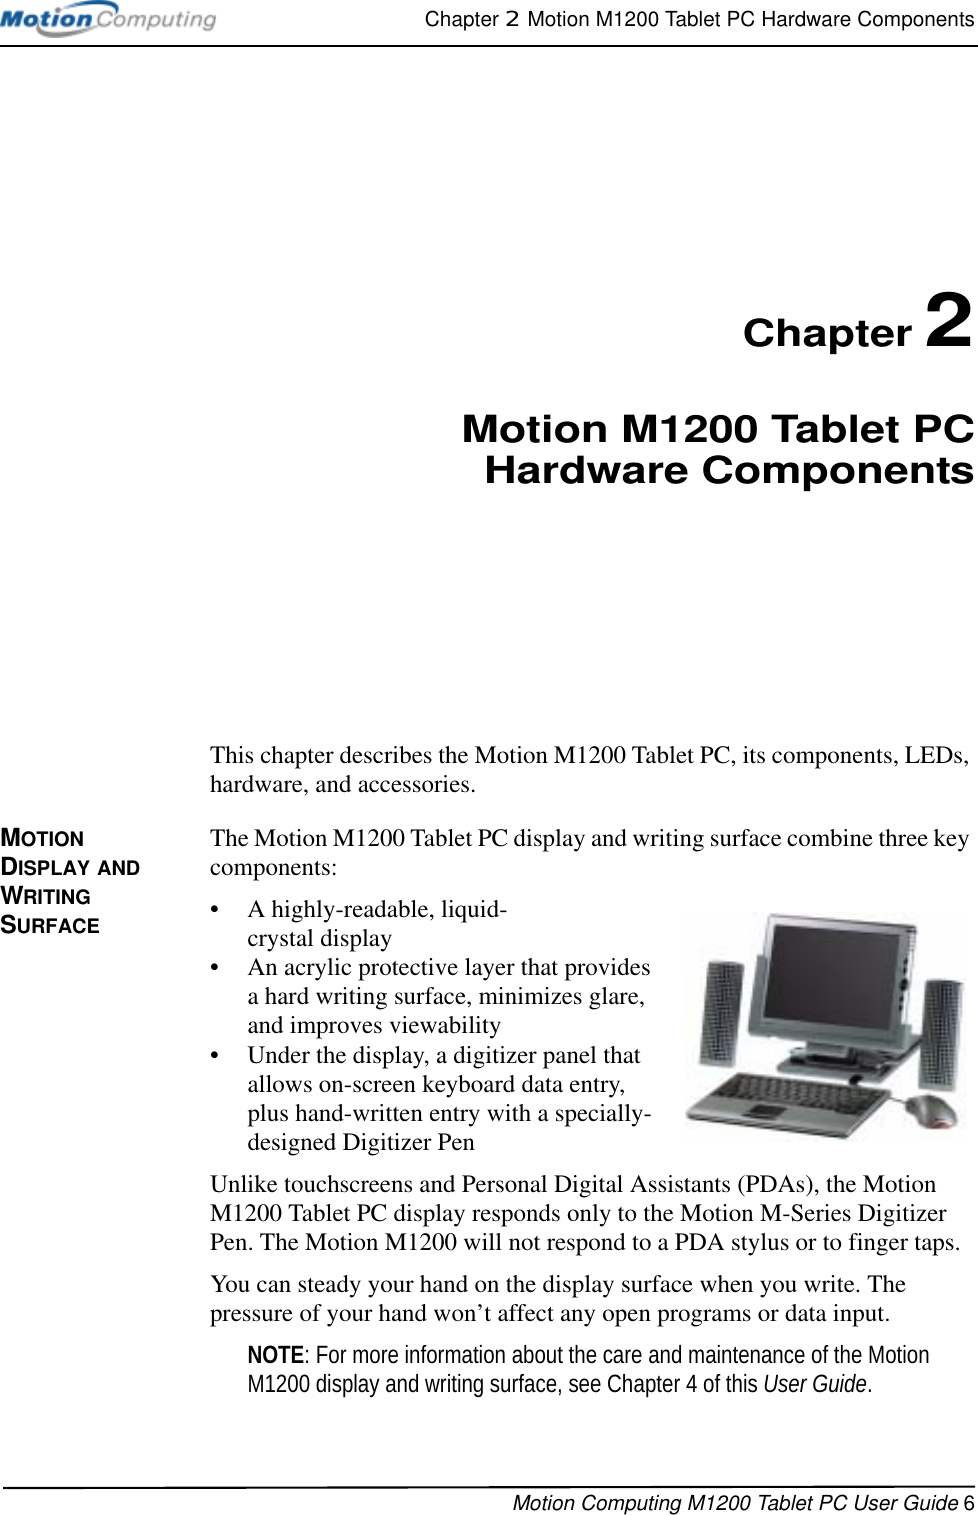 Chapter 2  Motion M1200 Tablet PC Hardware ComponentsMotion Computing M1200 Tablet PC User Guide 6Chapter 2Motion M1200 Tablet PCHardware ComponentsThis chapter describes the Motion M1200 Tablet PC, its components, LEDs, hardware, and accessories.MOTION DISPLAY AND WRITING SURFACEThe Motion M1200 Tablet PC display and writing surface combine three key components: • A highly-readable, liquid-crystal display • An acrylic protective layer that provides a hard writing surface, minimizes glare, and improves viewability• Under the display, a digitizer panel that allows on-screen keyboard data entry, plus hand-written entry with a specially-designed Digitizer PenUnlike touchscreens and Personal Digital Assistants (PDAs), the Motion M1200 Tablet PC display responds only to the Motion M-Series Digitizer Pen. The Motion M1200 will not respond to a PDA stylus or to finger taps. You can steady your hand on the display surface when you write. The pressure of your hand won’t affect any open programs or data input. NOTE: For more information about the care and maintenance of the Motion M1200 display and writing surface, see Chapter 4 of this User Guide.